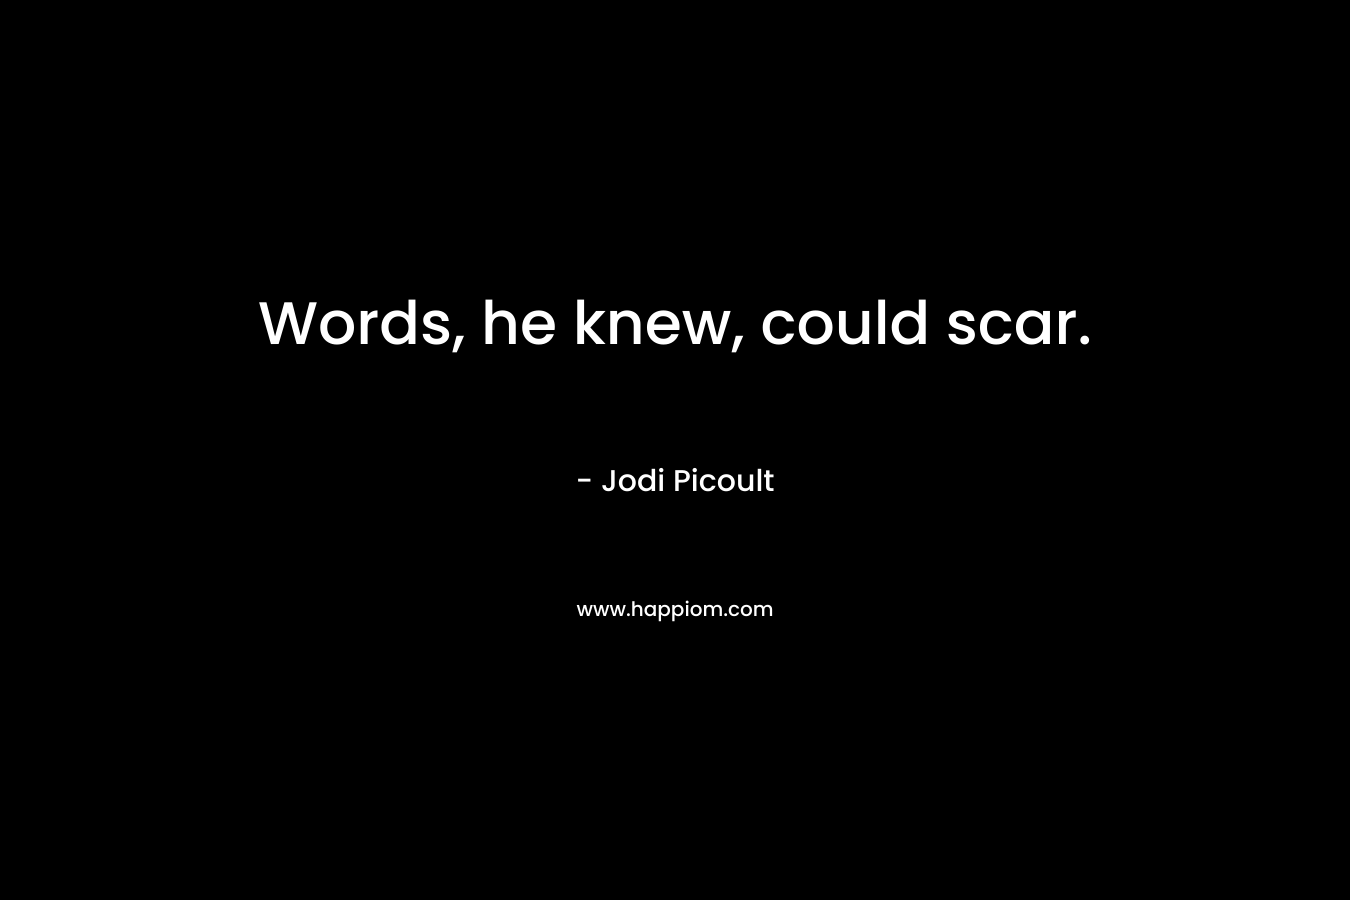 Words, he knew, could scar.